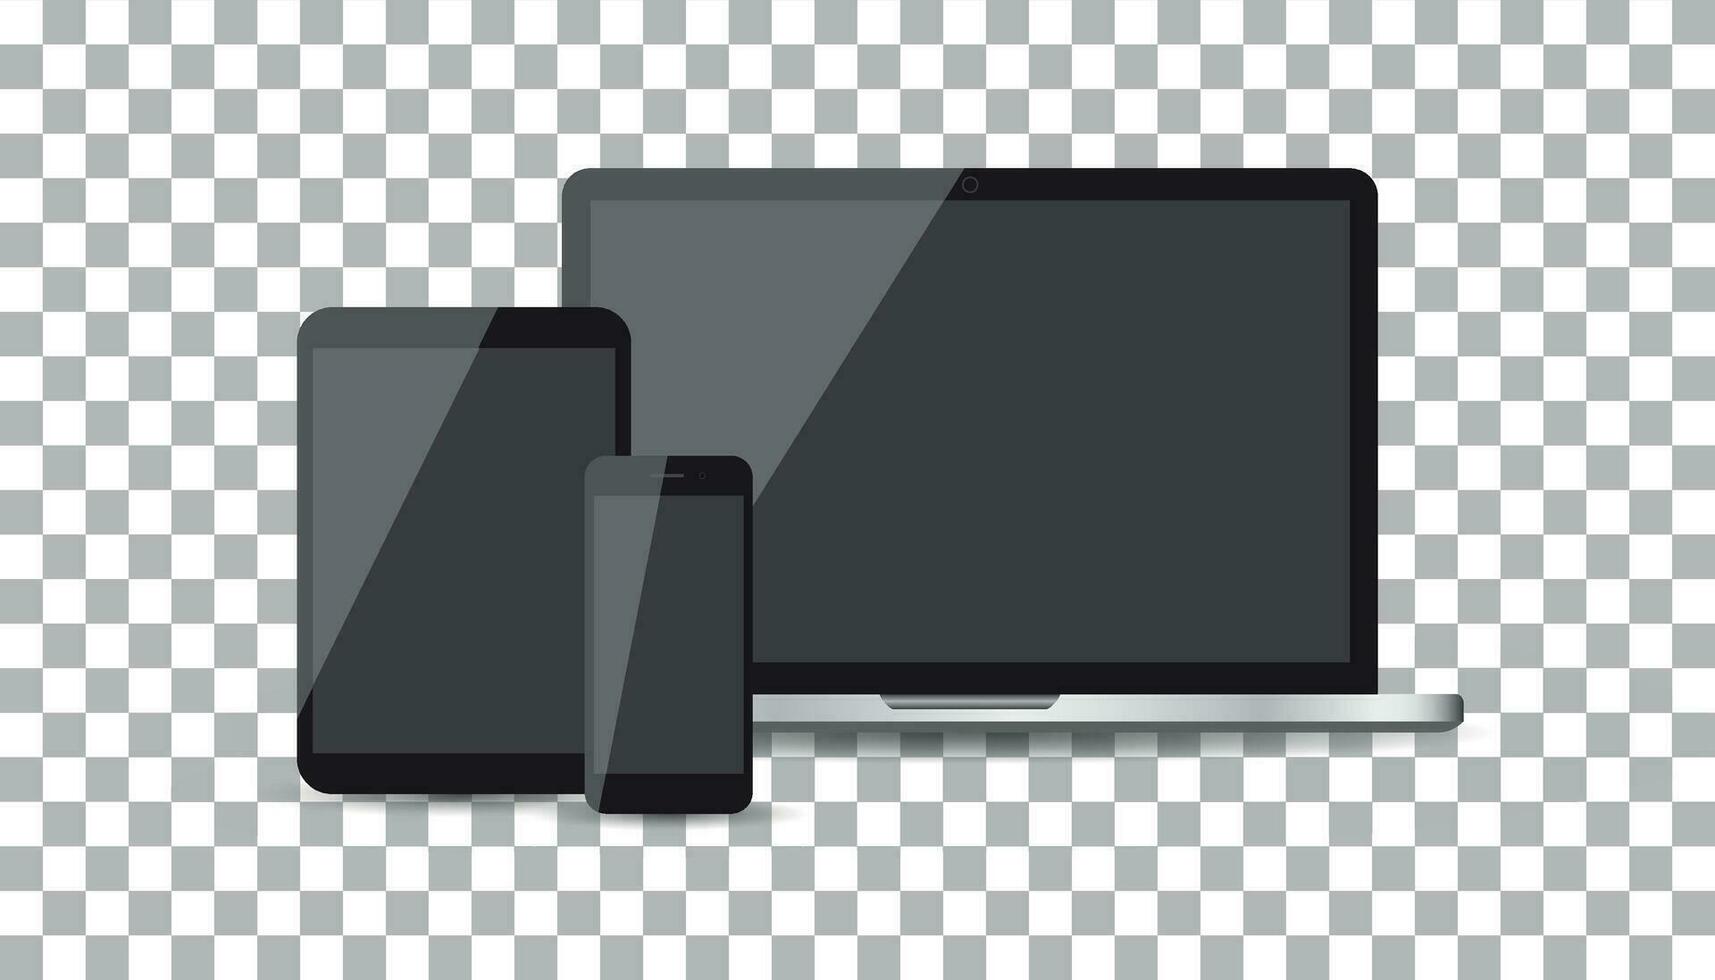 Realistic device flat Icons smartphone, tablet, laptop. Vector illustration on isolated background